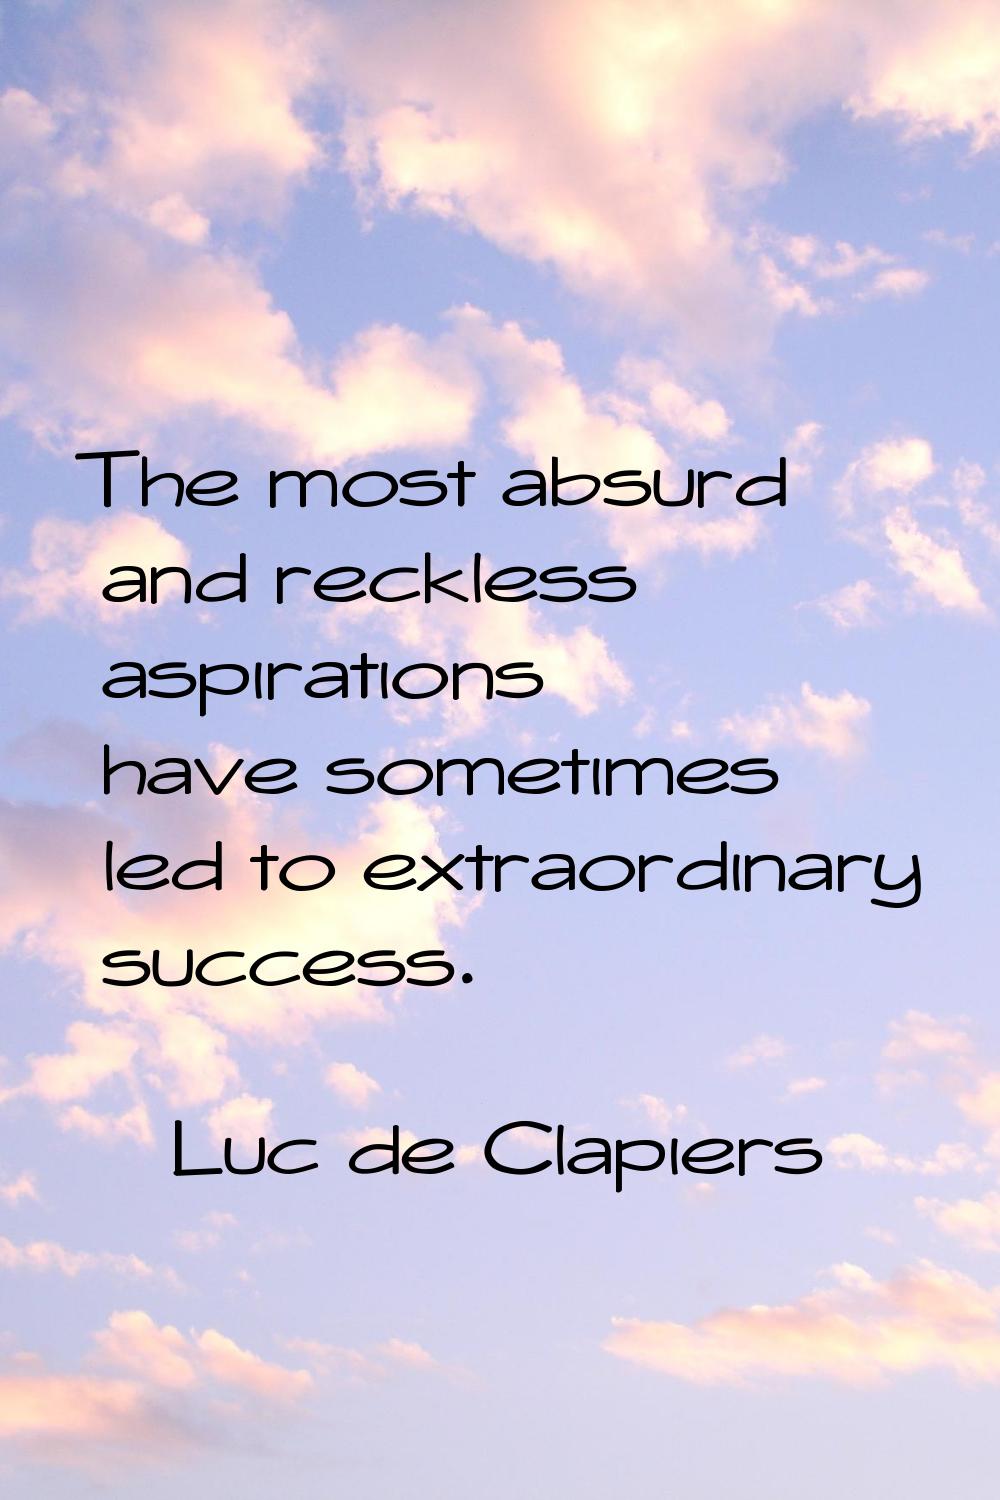 The most absurd and reckless aspirations have sometimes led to extraordinary success.